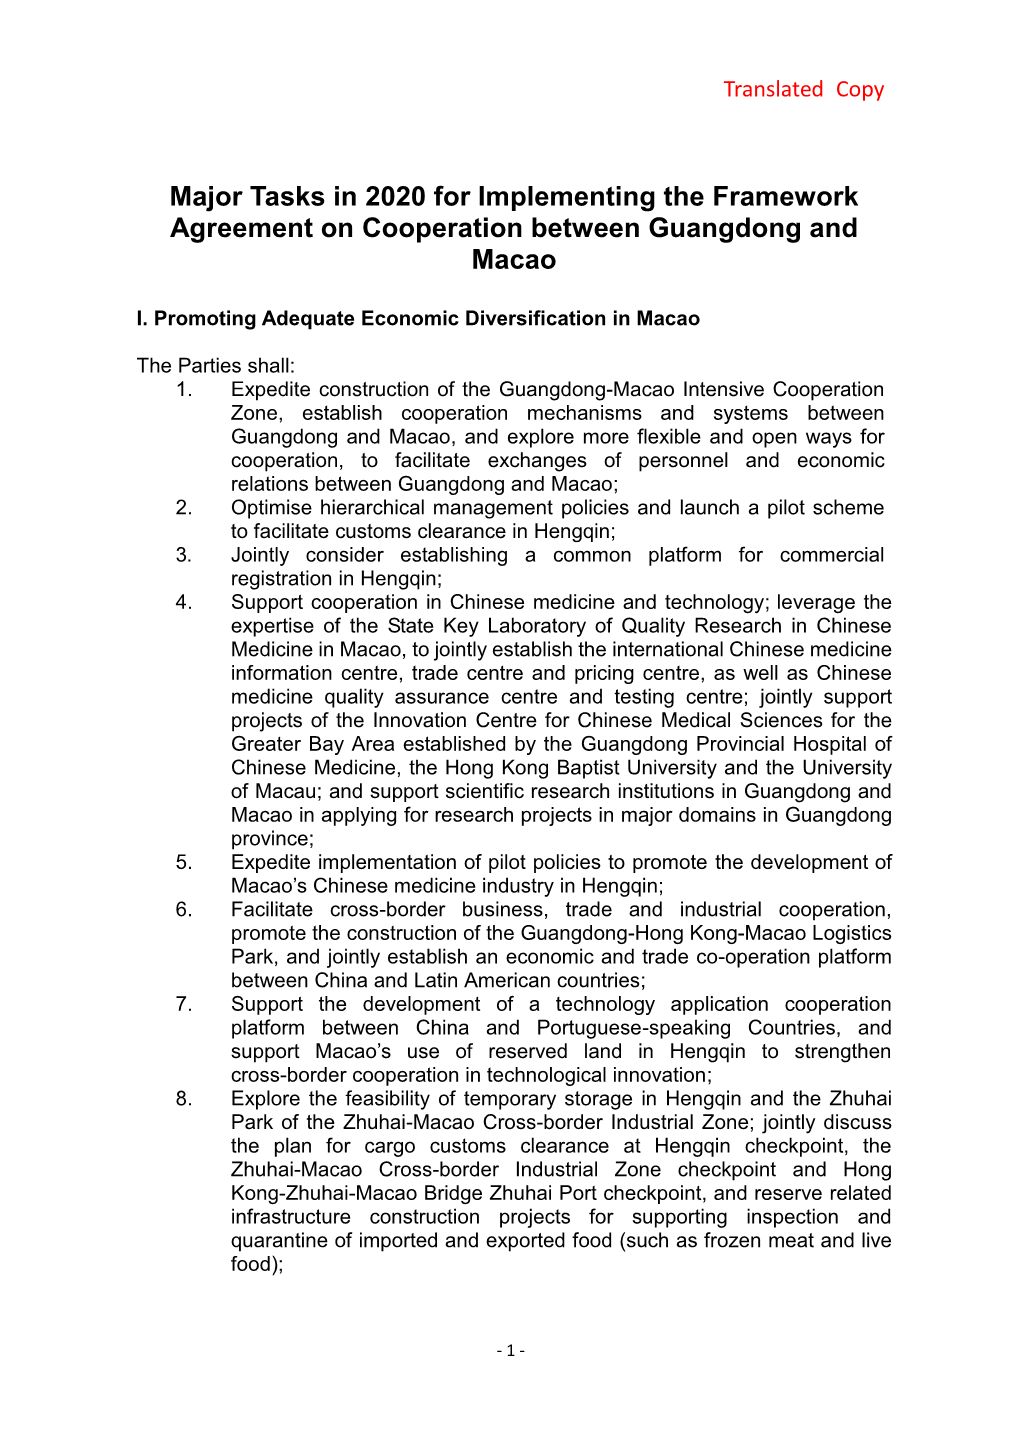 Major Tasks in 2020 for Implementing the Framework Agreement on Cooperation Between Guangdong and Macao